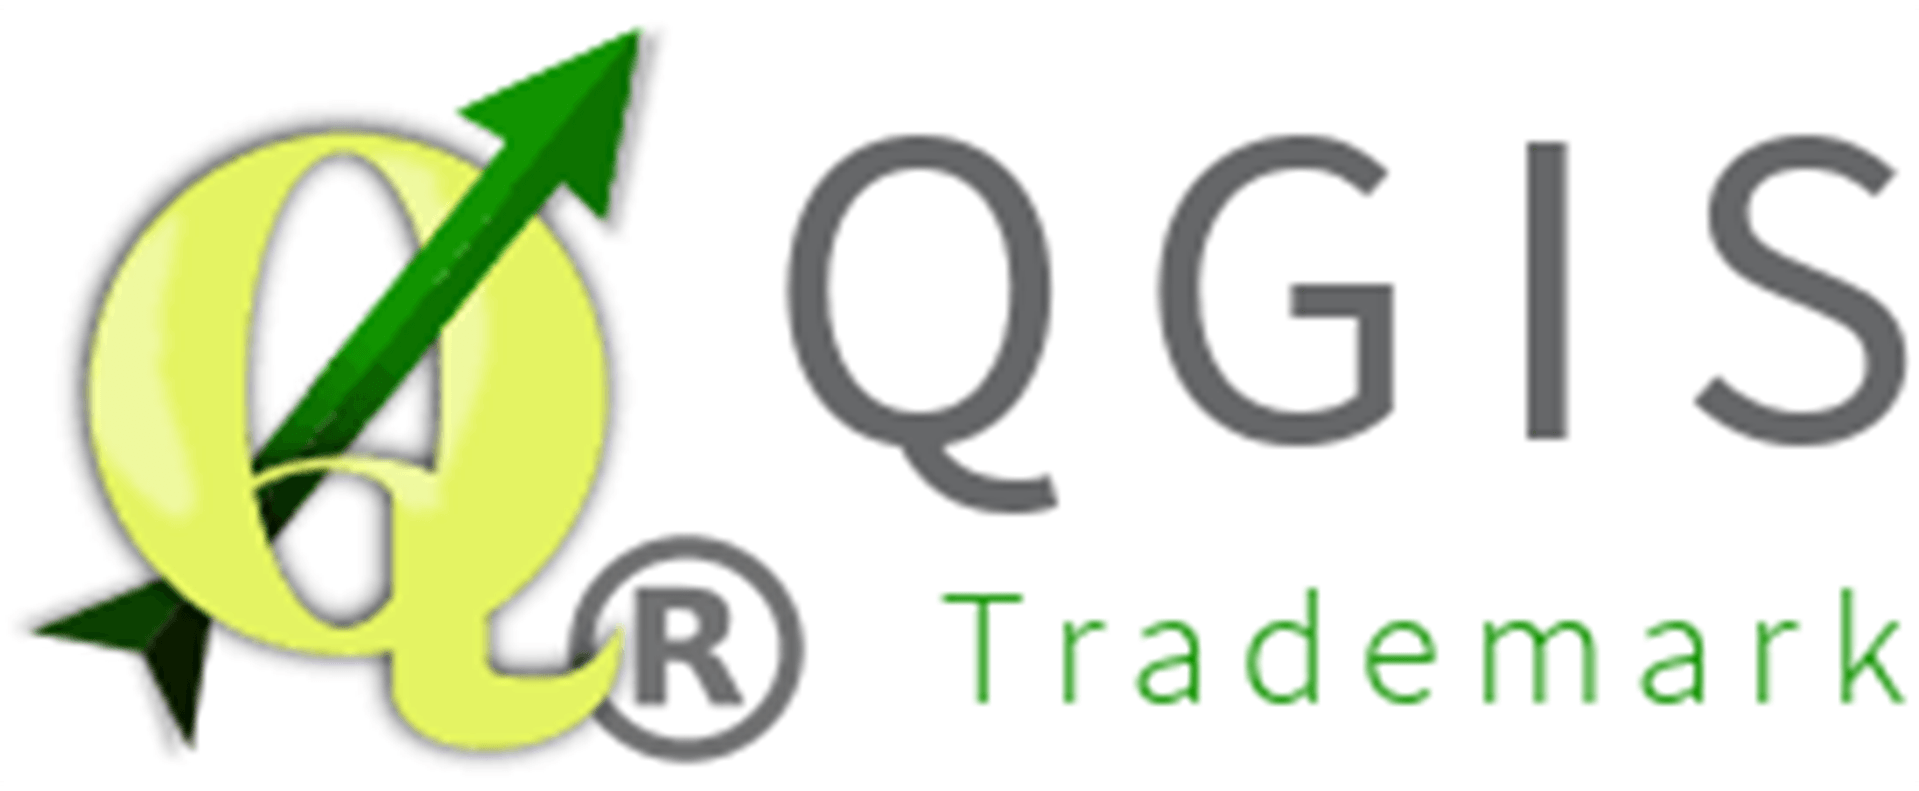 QGIS Logo - Updating Column Name and Column Value in QGIS – The Geo-ICT Blog